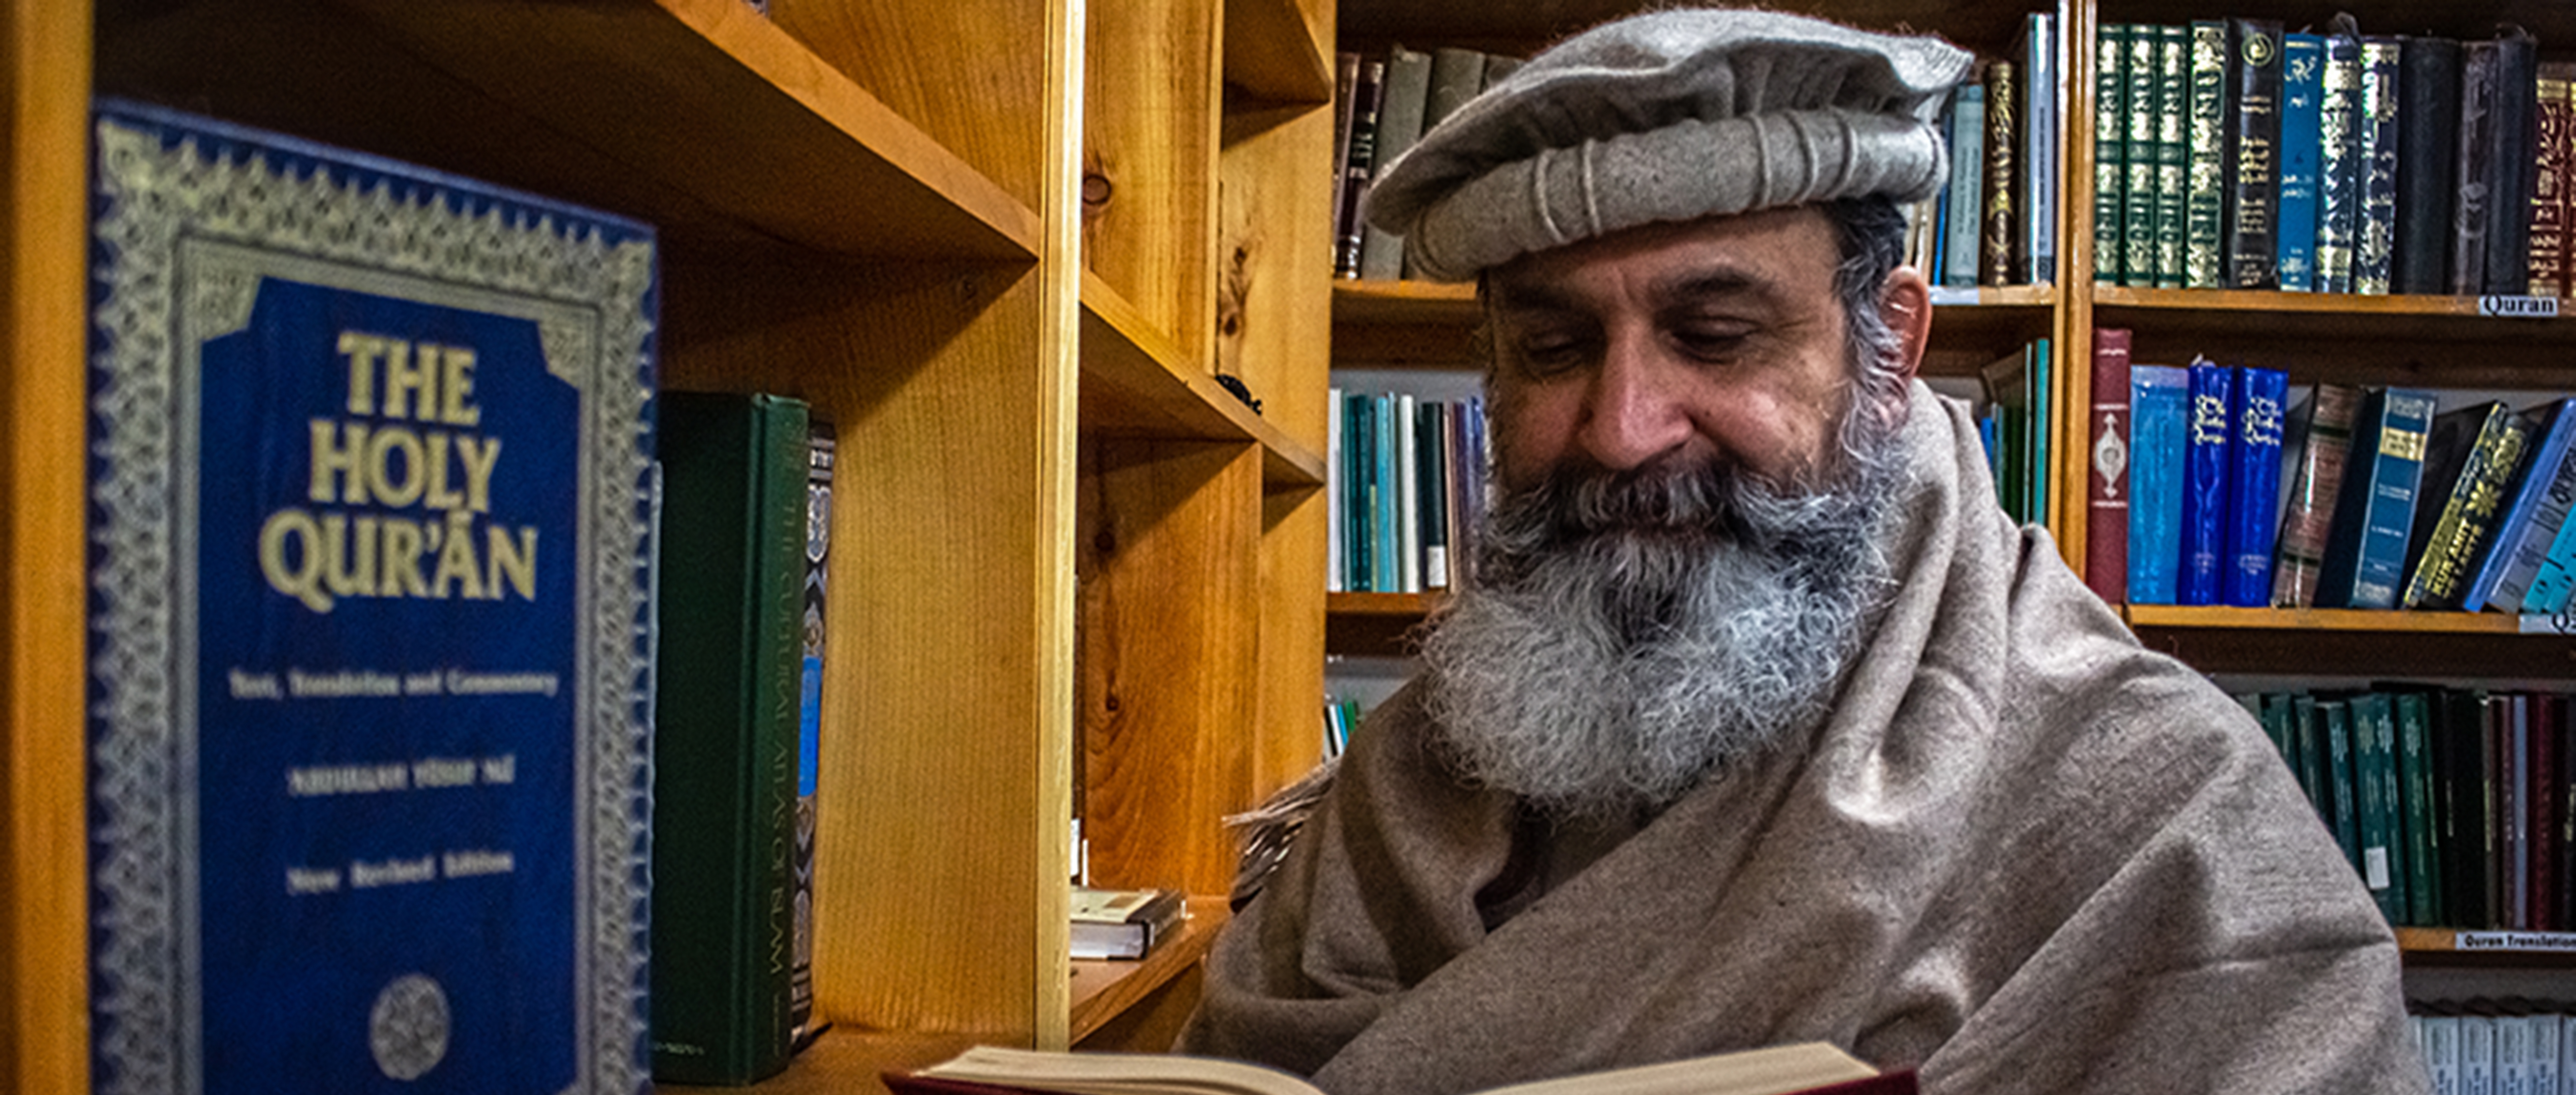 A bearded imam reads a book in the library of a mosque in St. John's, Newfoundland. A blue-covered Koran is visible on a bookshelf. Muslims in St. John's recently commemorated the sixth anniversary of an attack on a mosque in Quebec City.